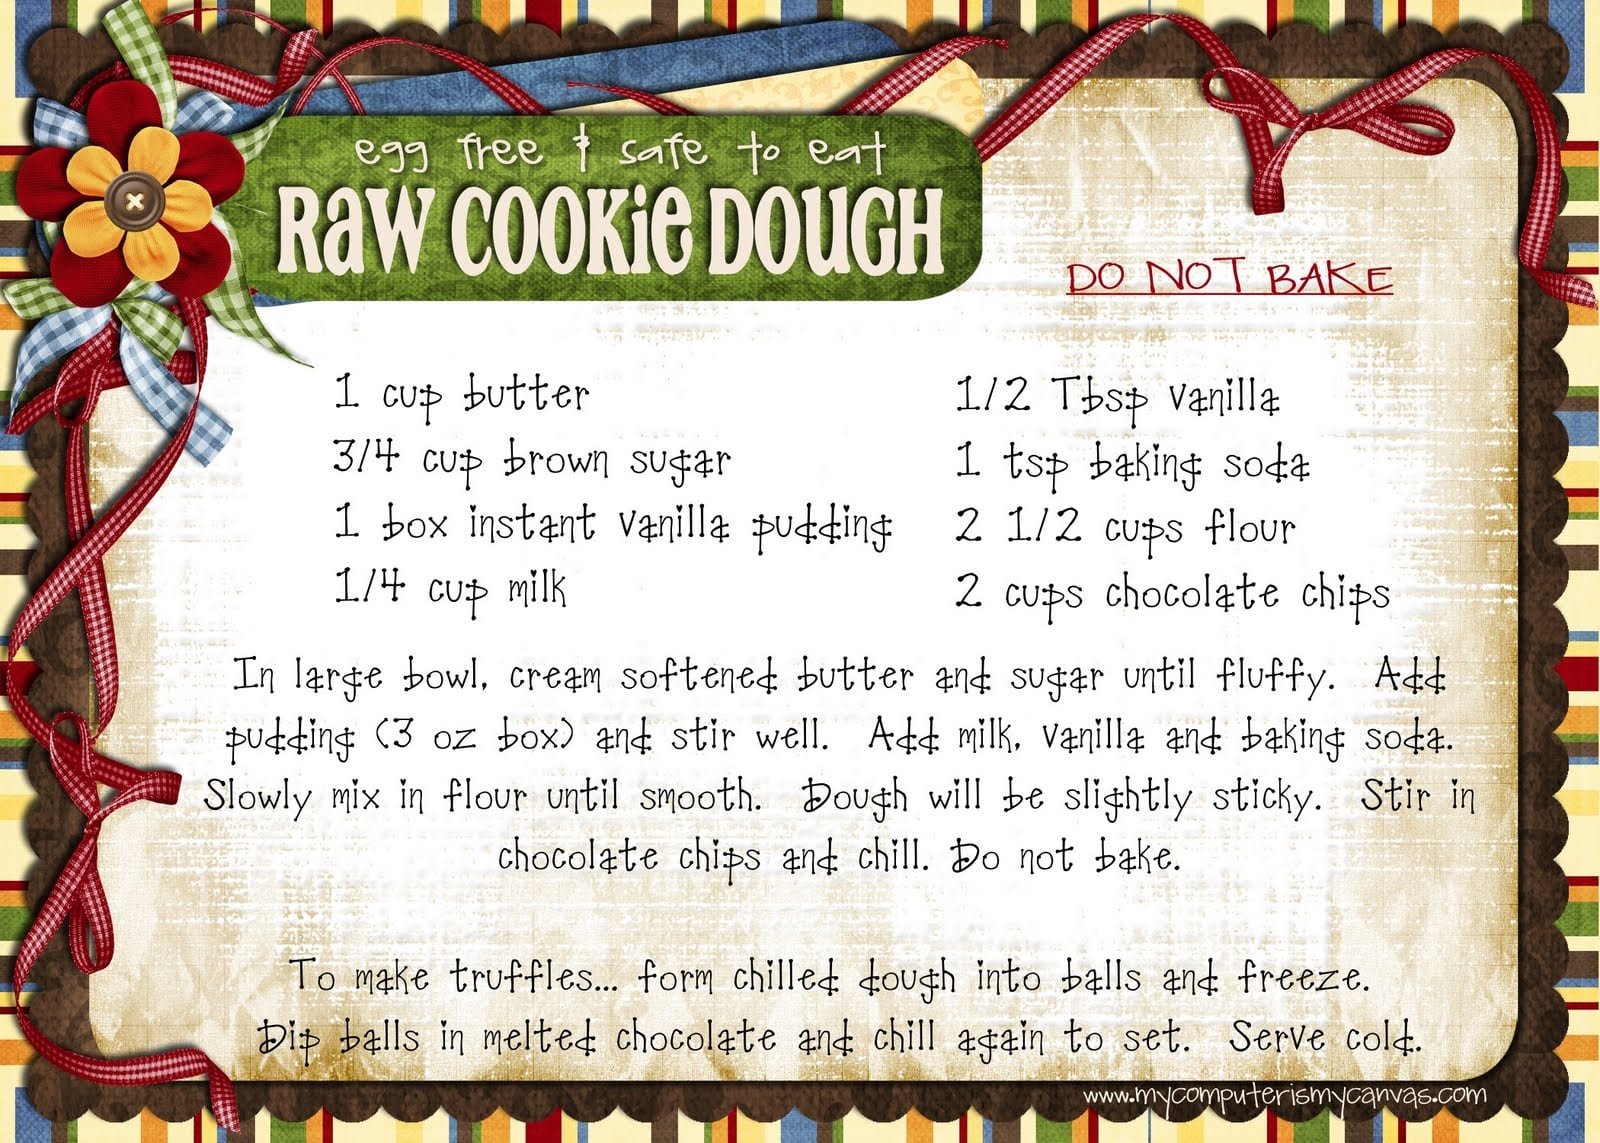 My Computer Is My Canvas  Safe To Serve Raw Cookie Dough Recipe!